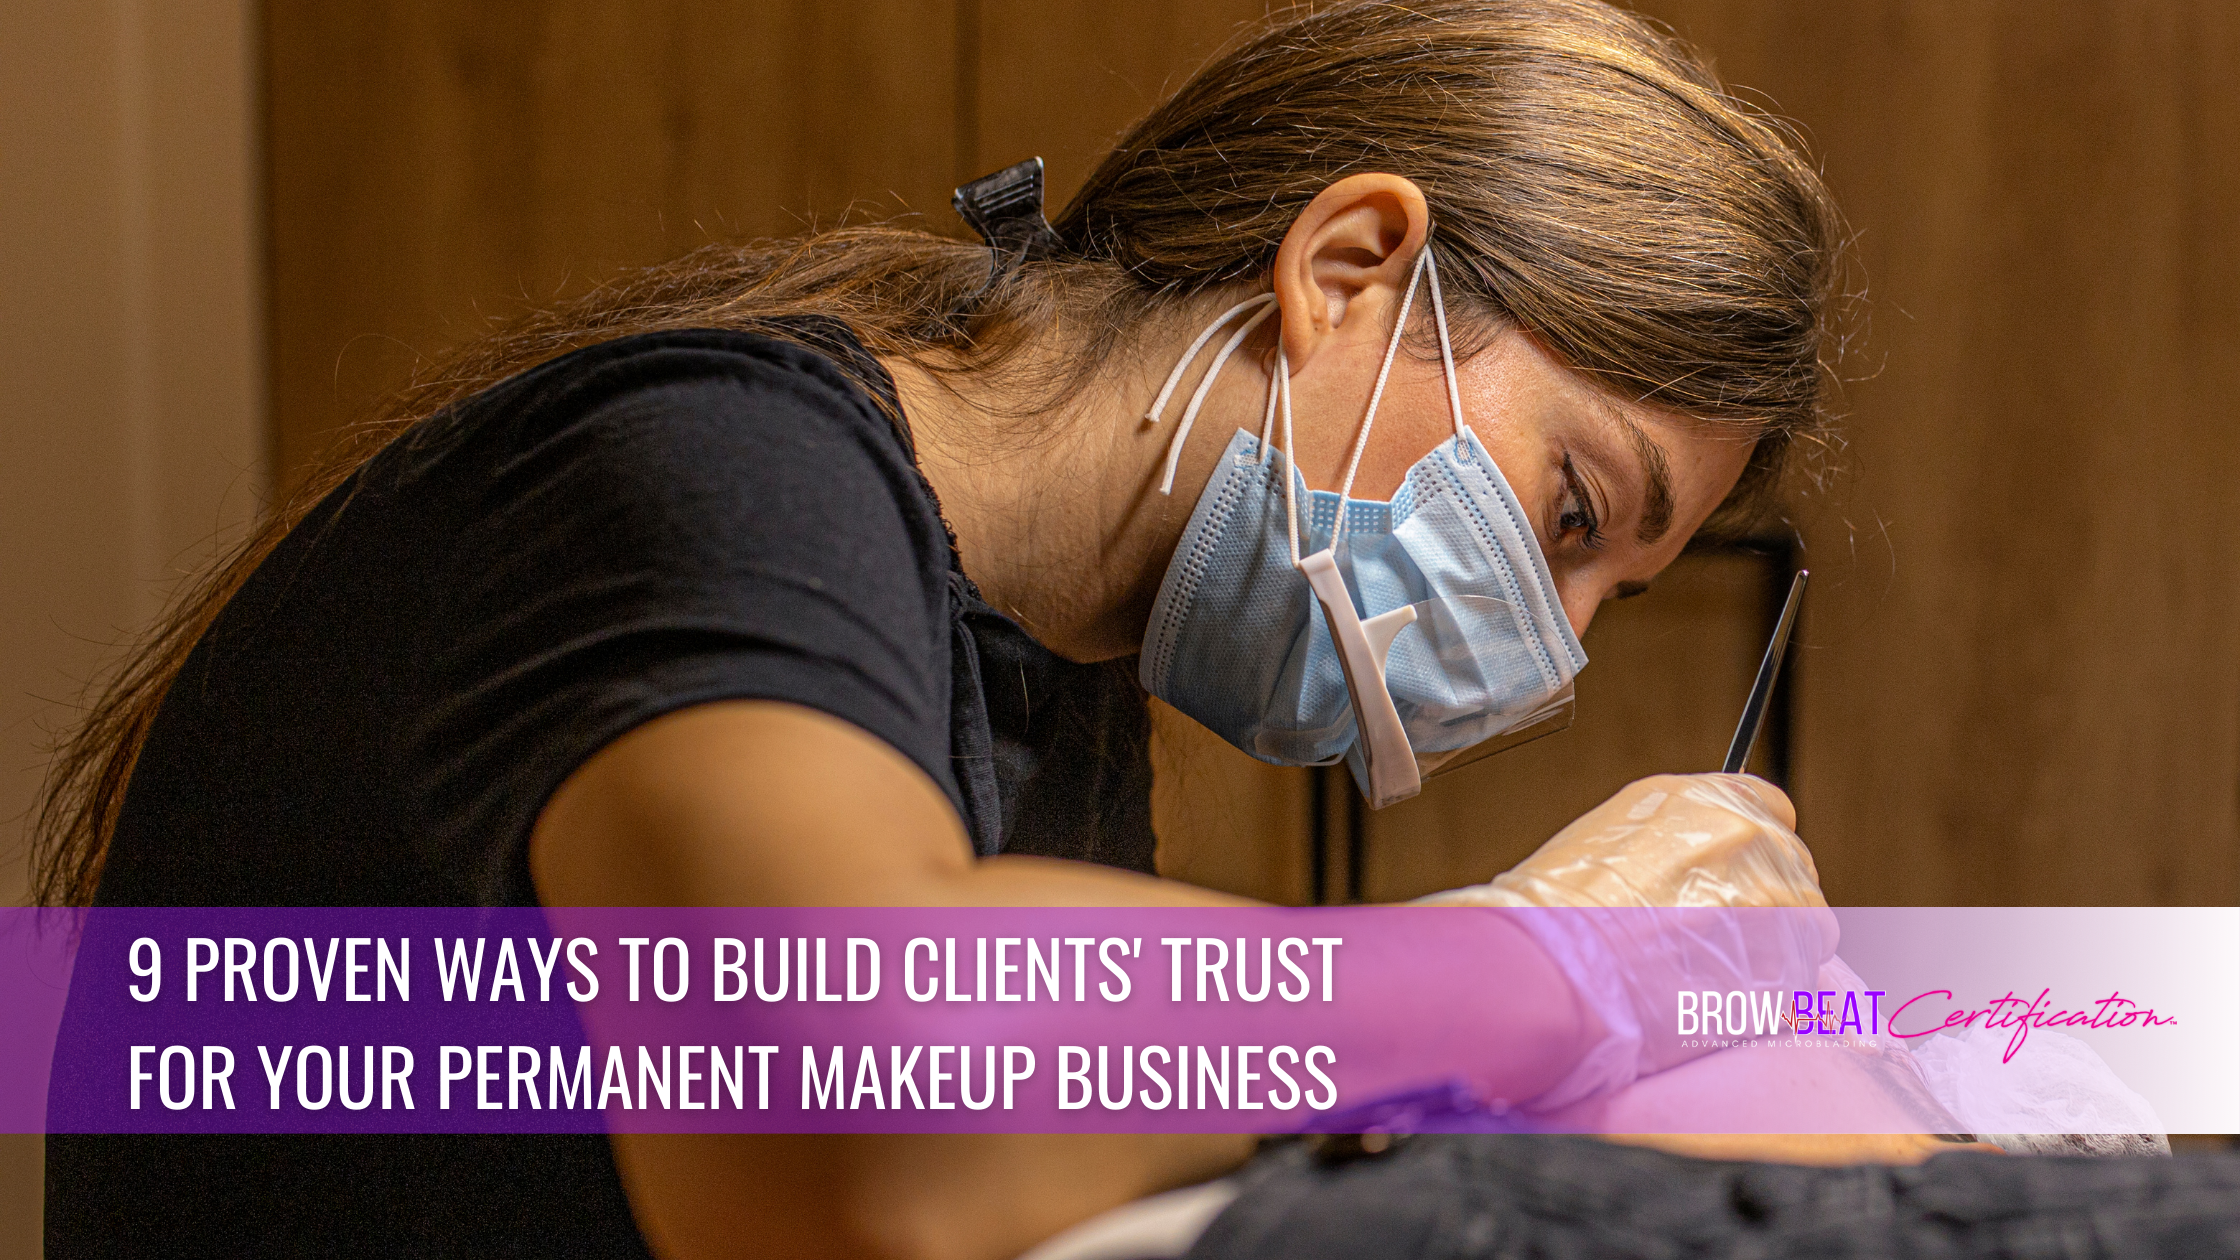 9 Proven Ways to Build Clients' Trust For Your Permanent Makeup Business